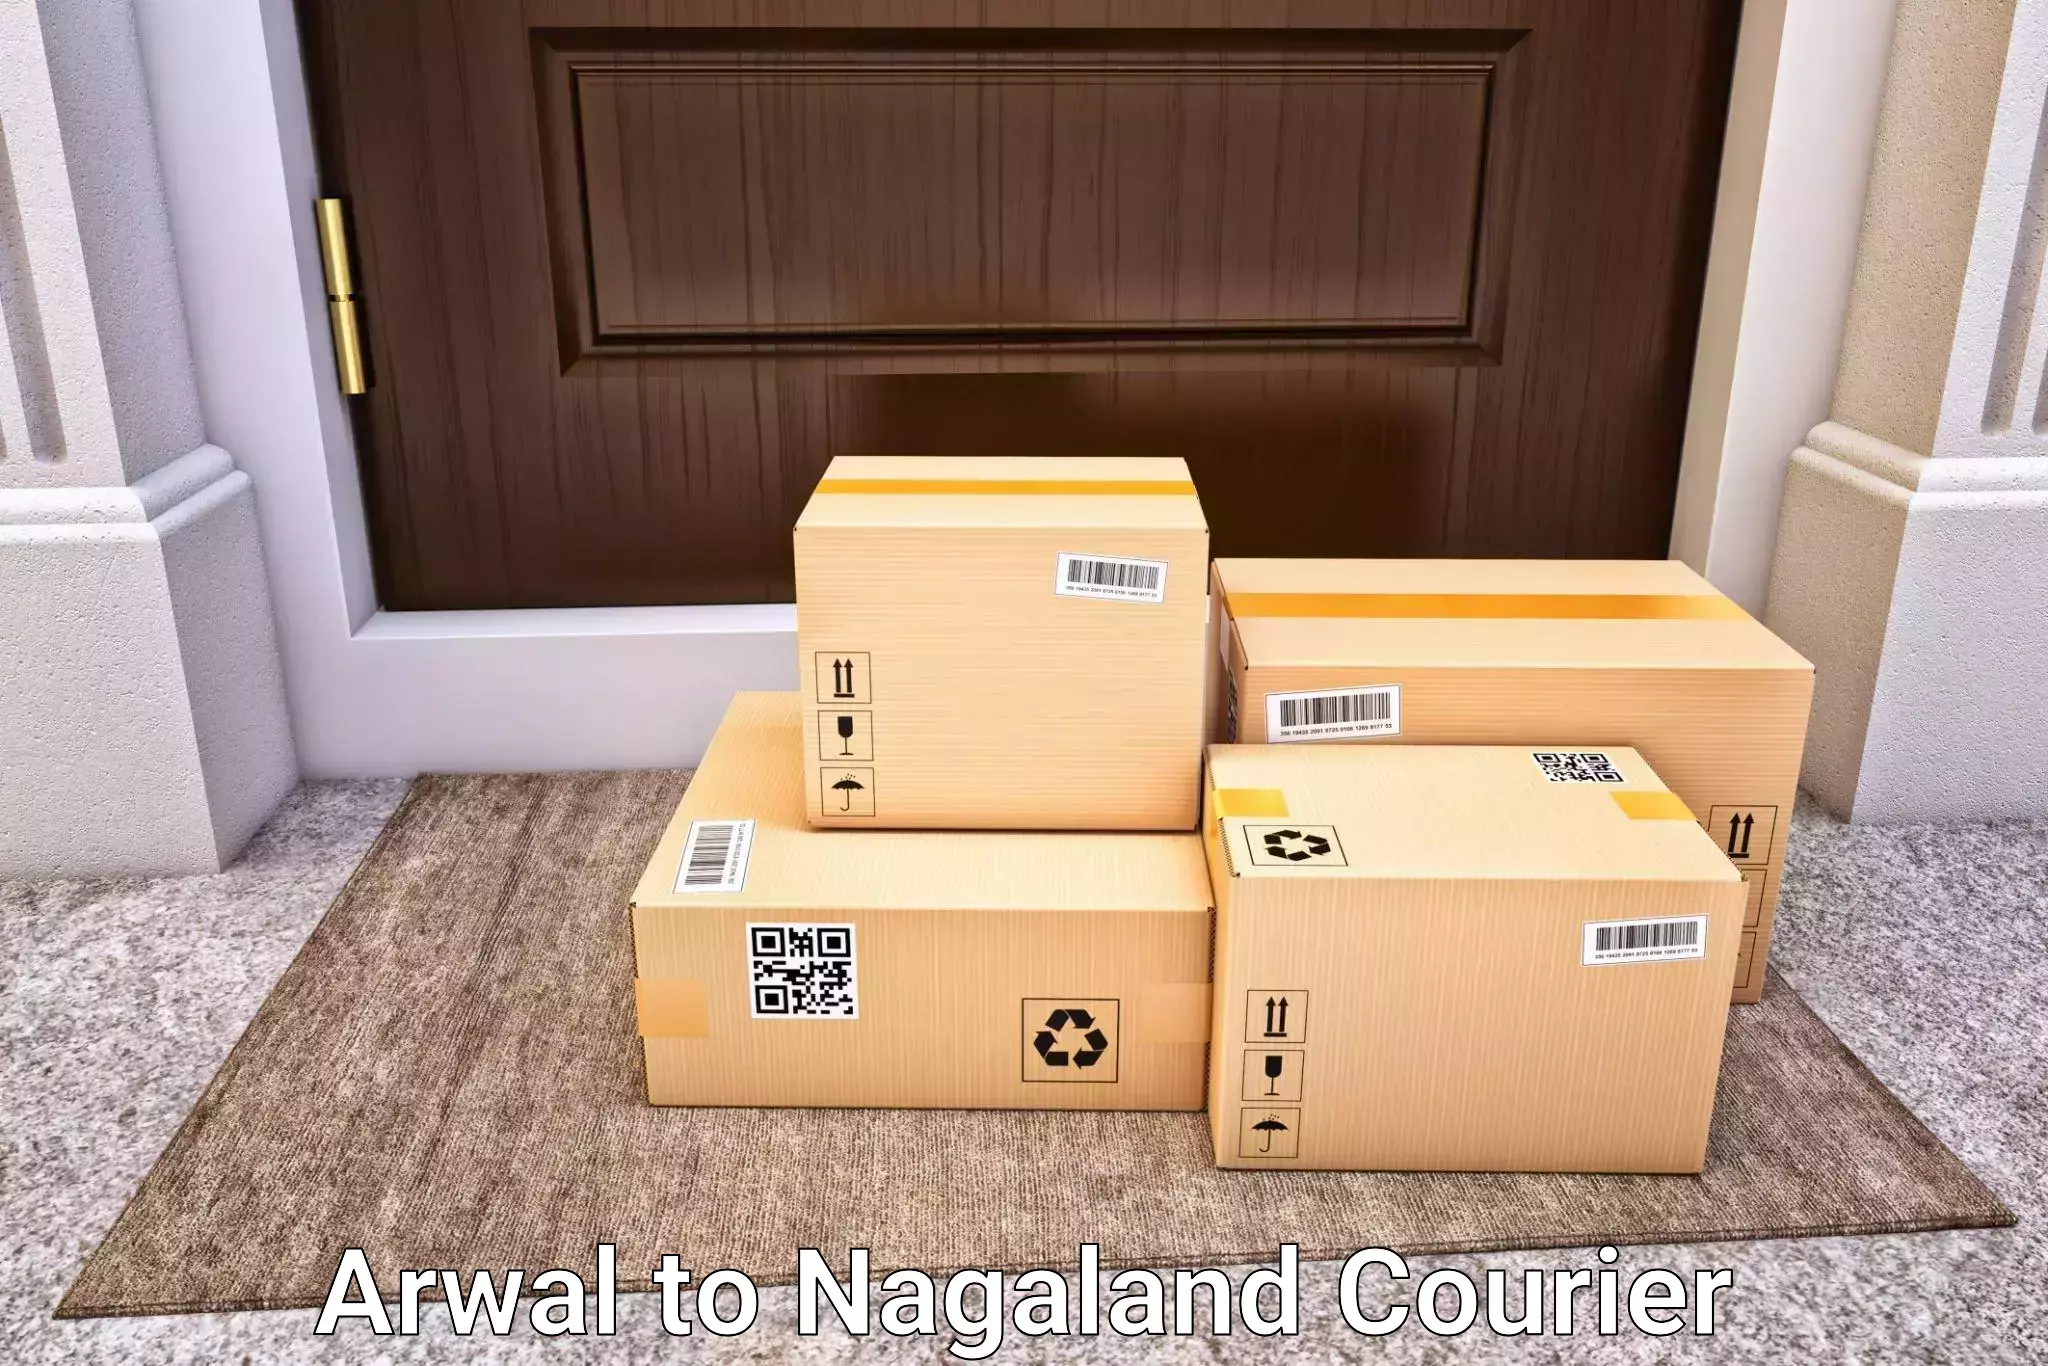 Luggage shipping discounts in Arwal to Nagaland